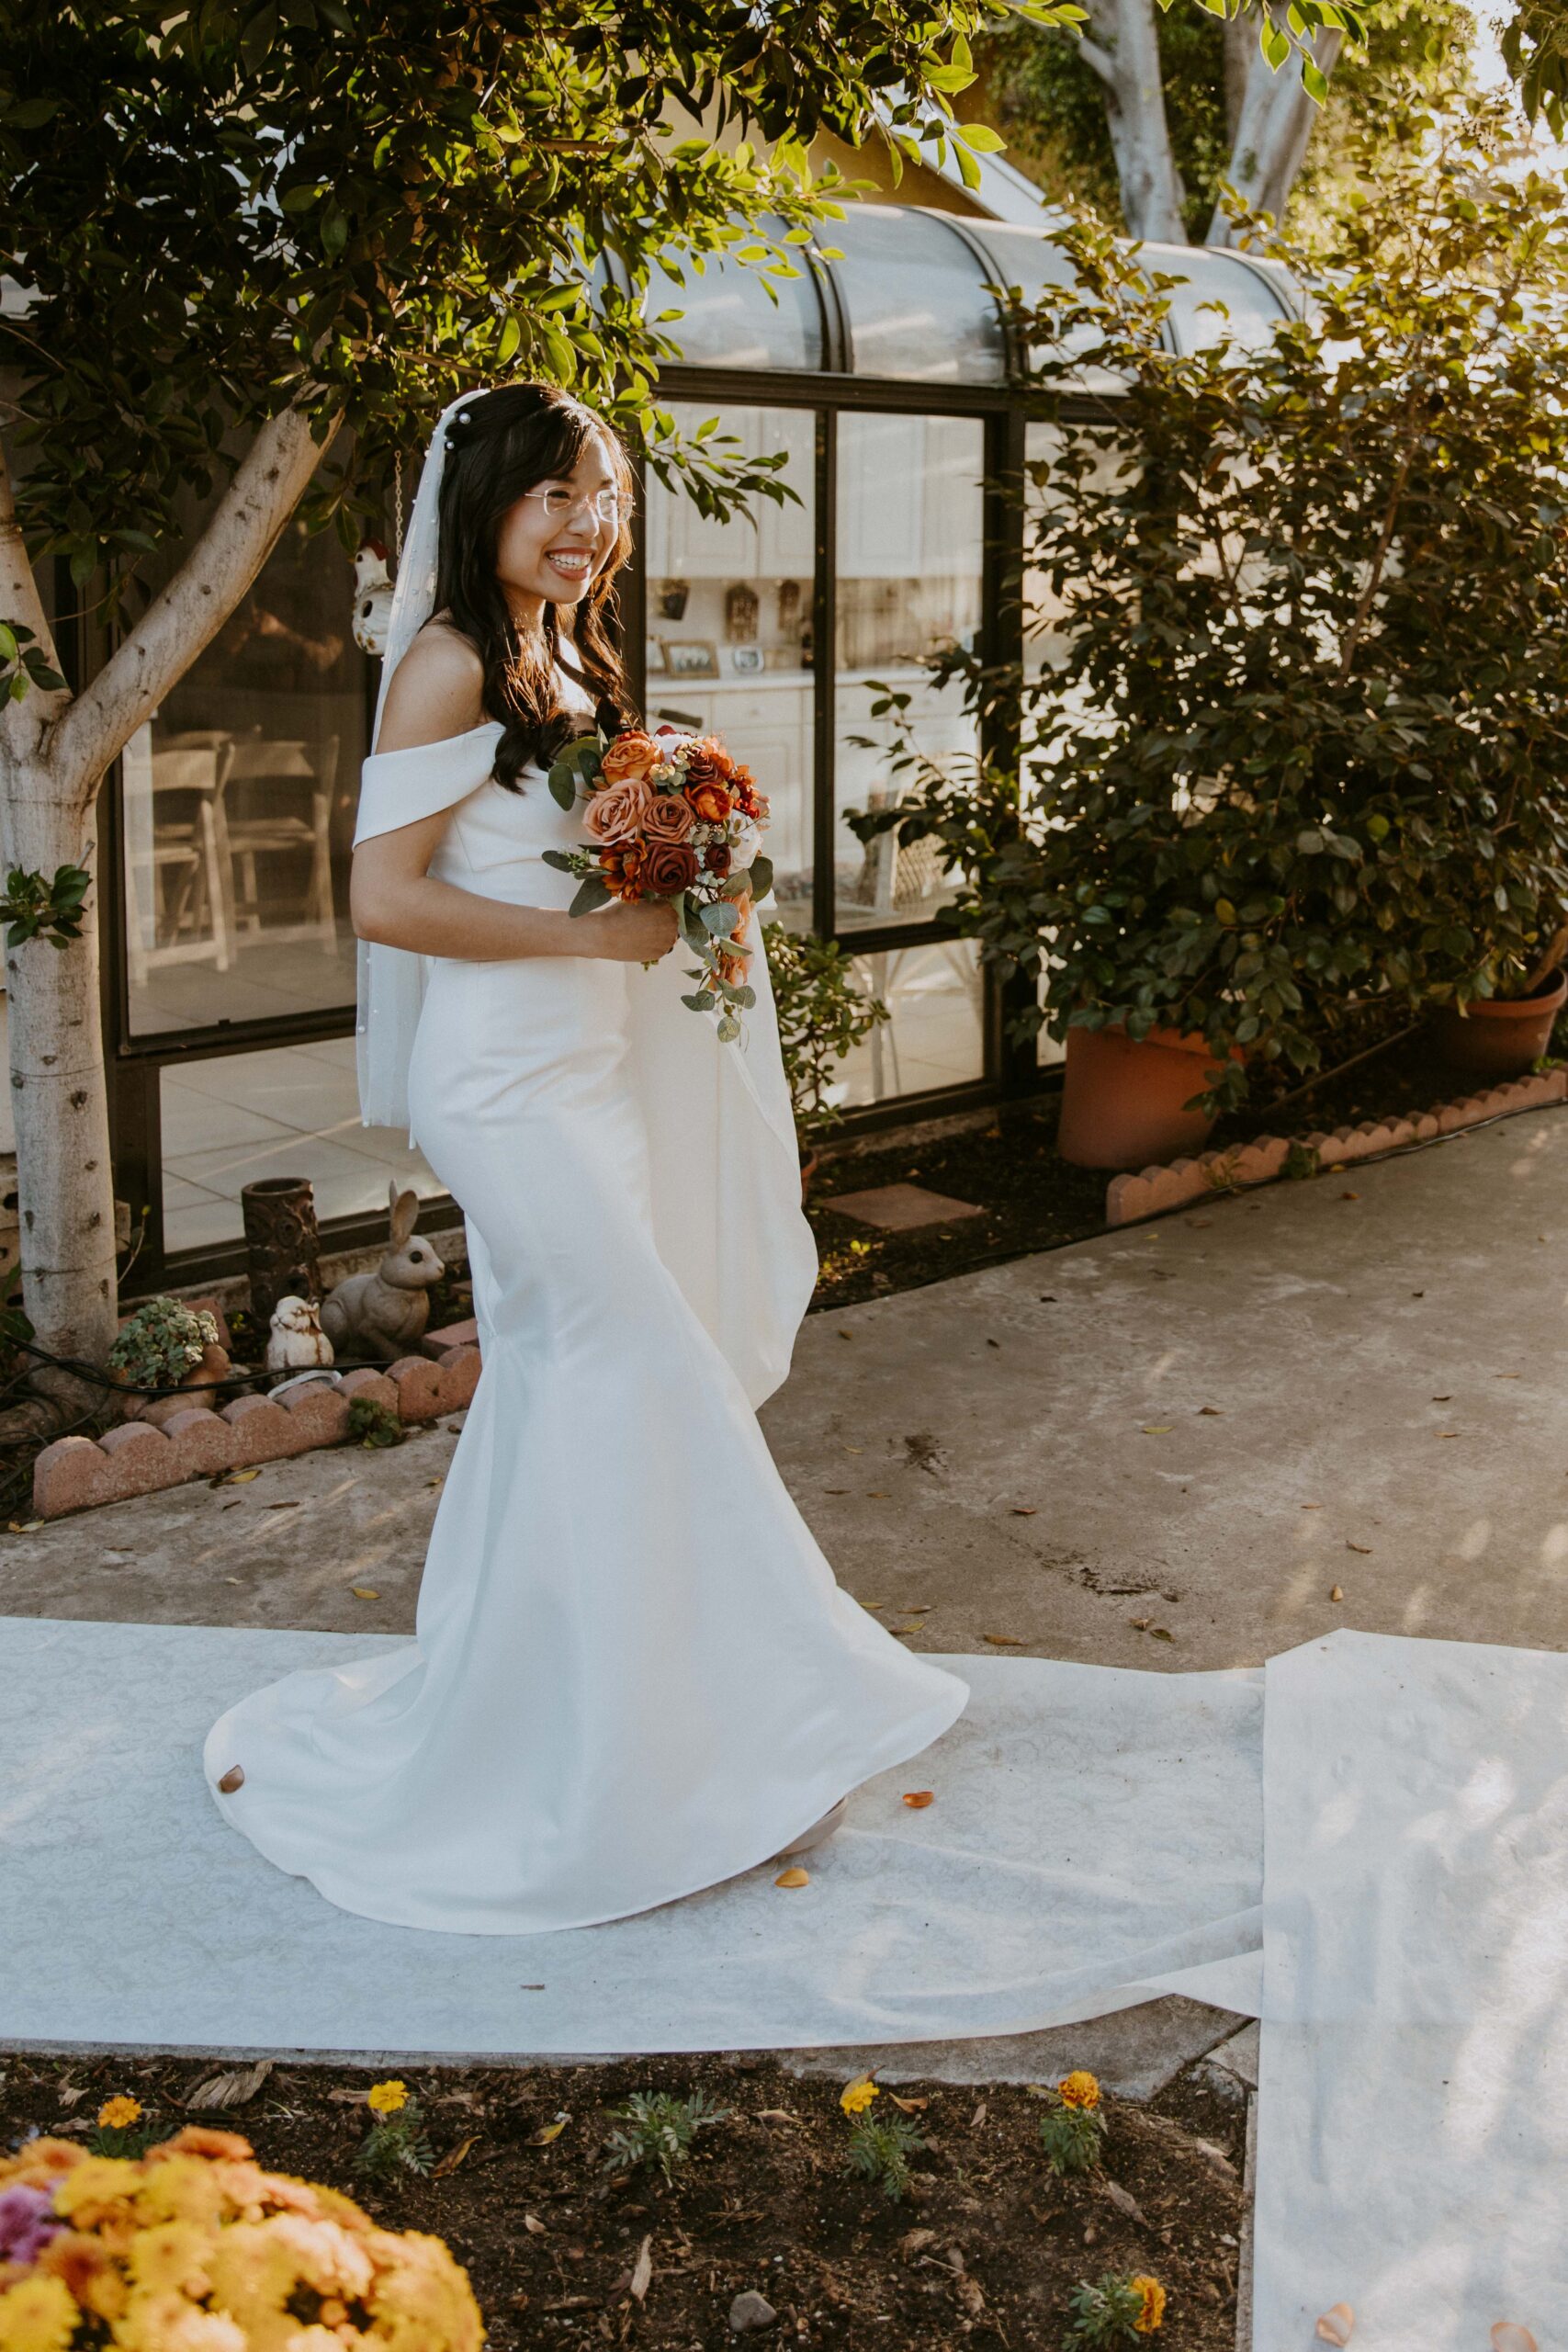 A bride in a white dress holding a bouquet of flowers.